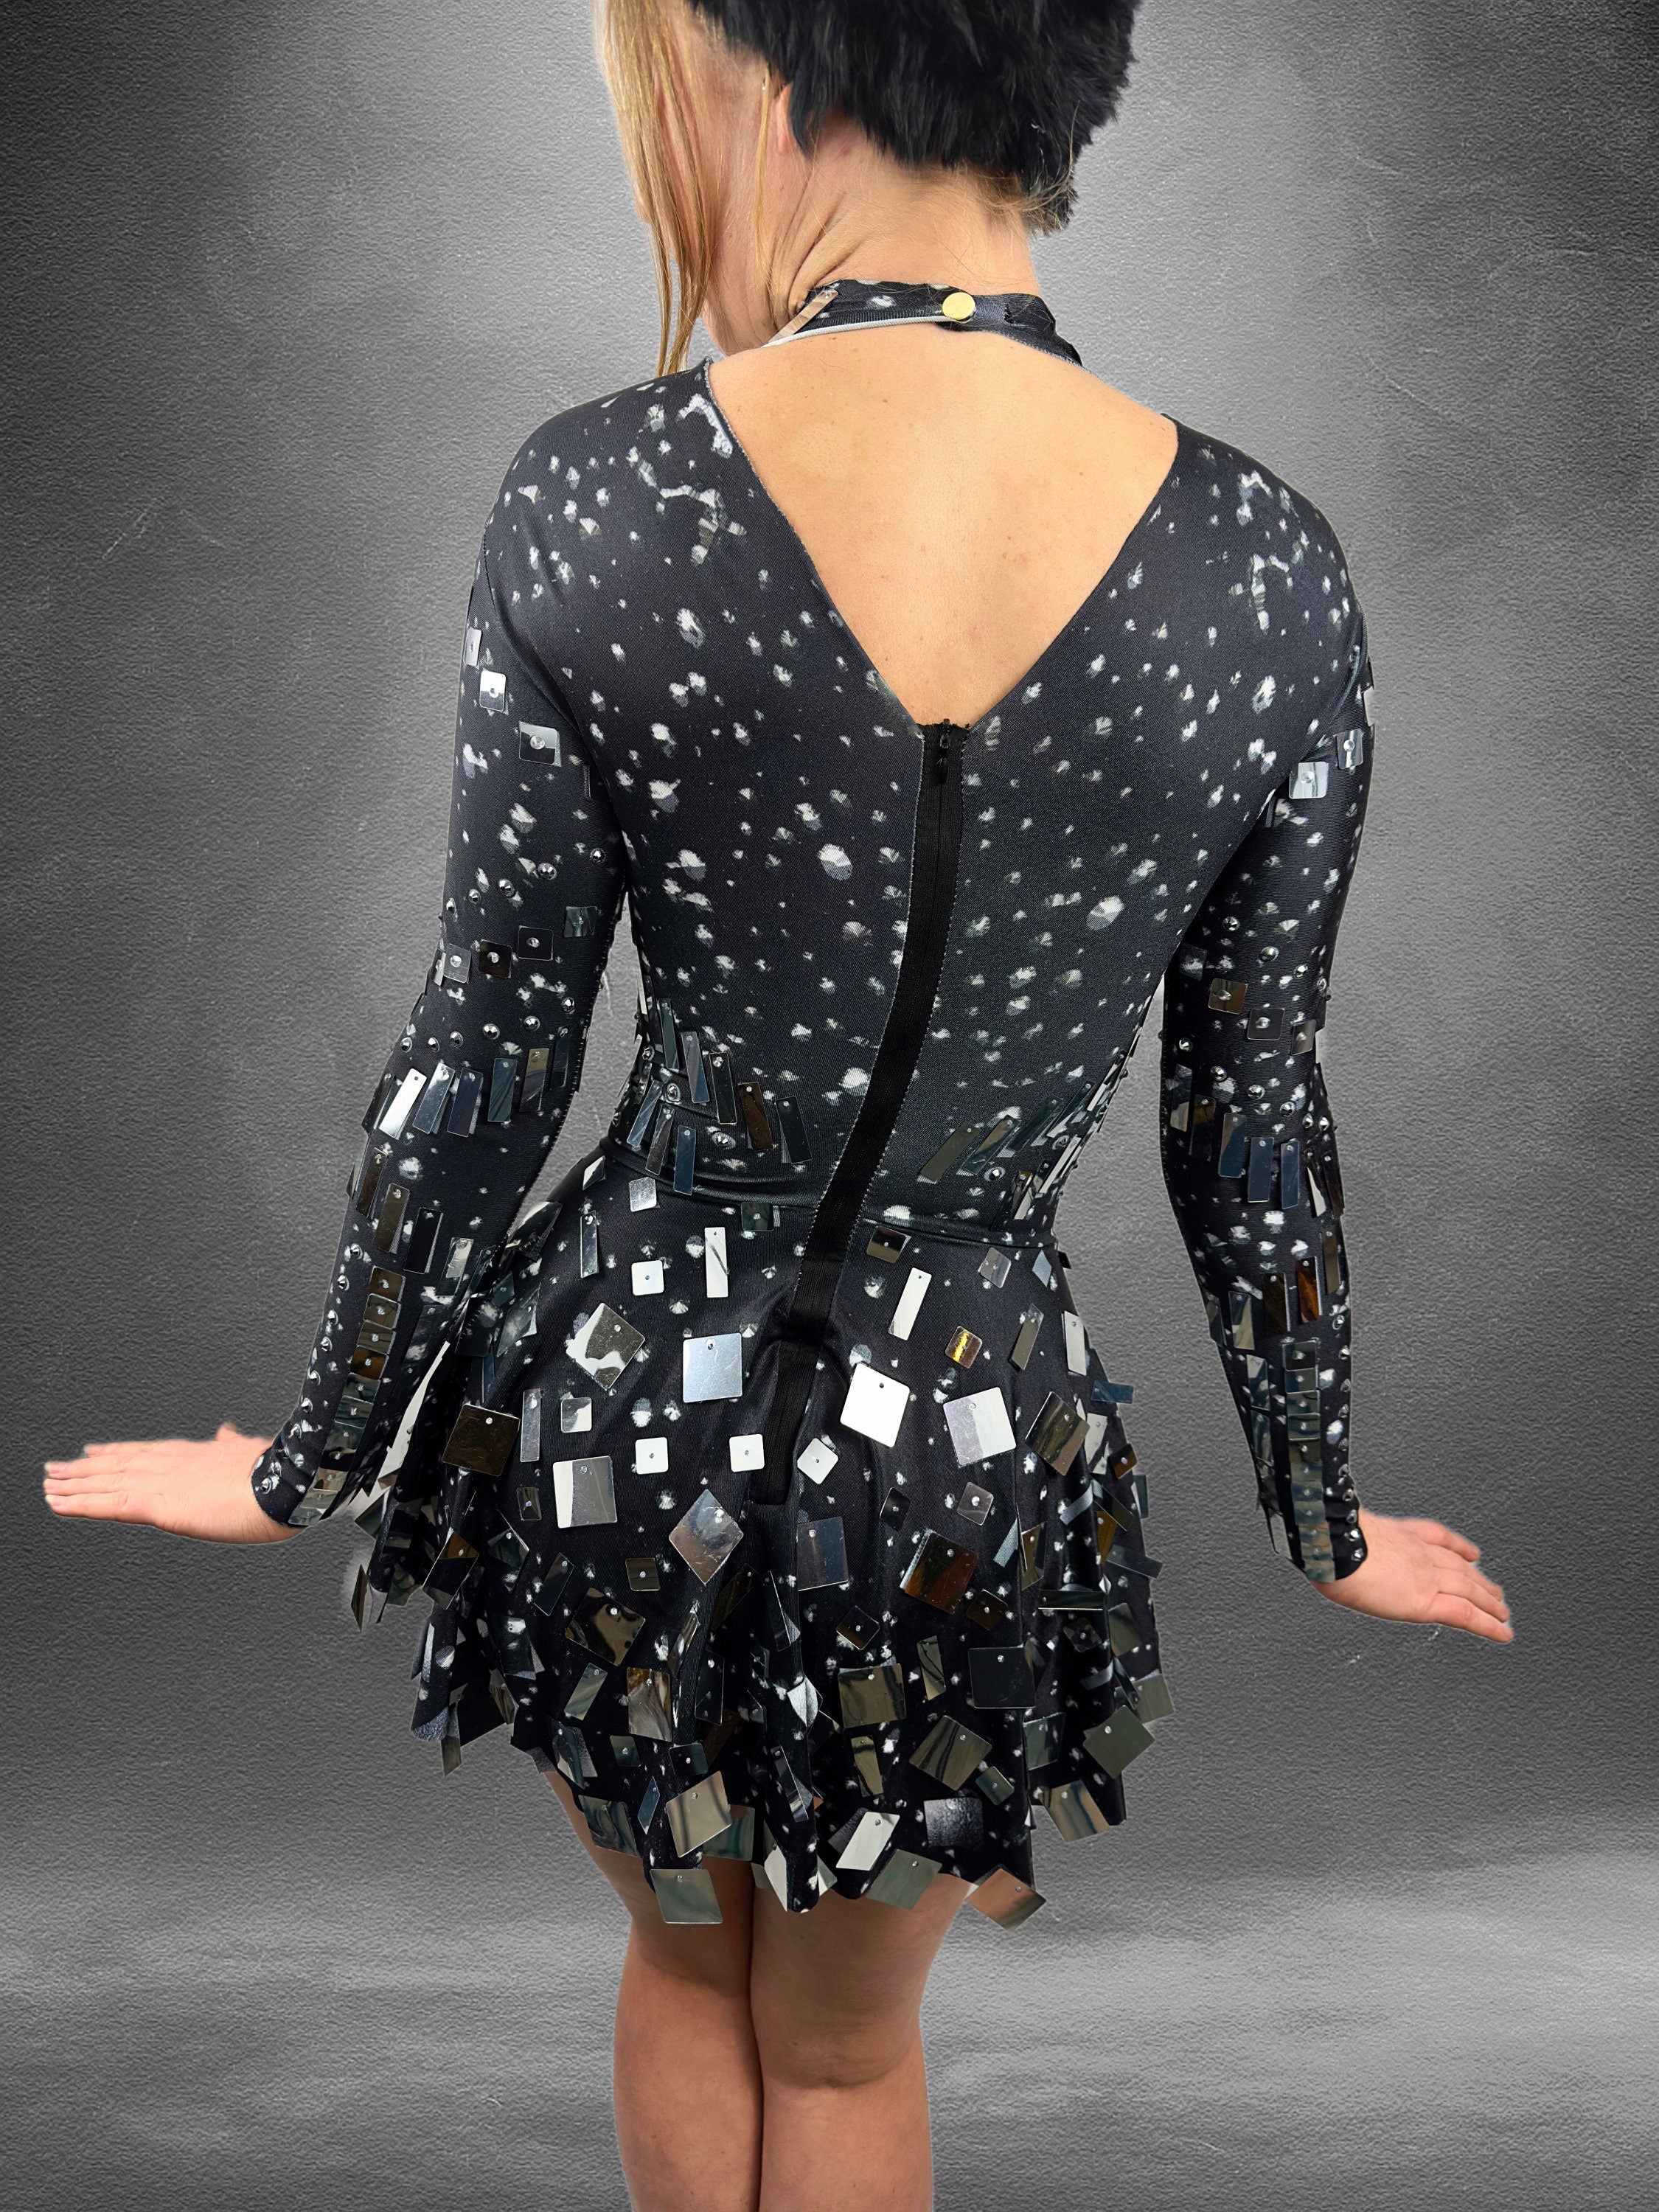 Gold mirror sequin dress - disco ball costume party dress